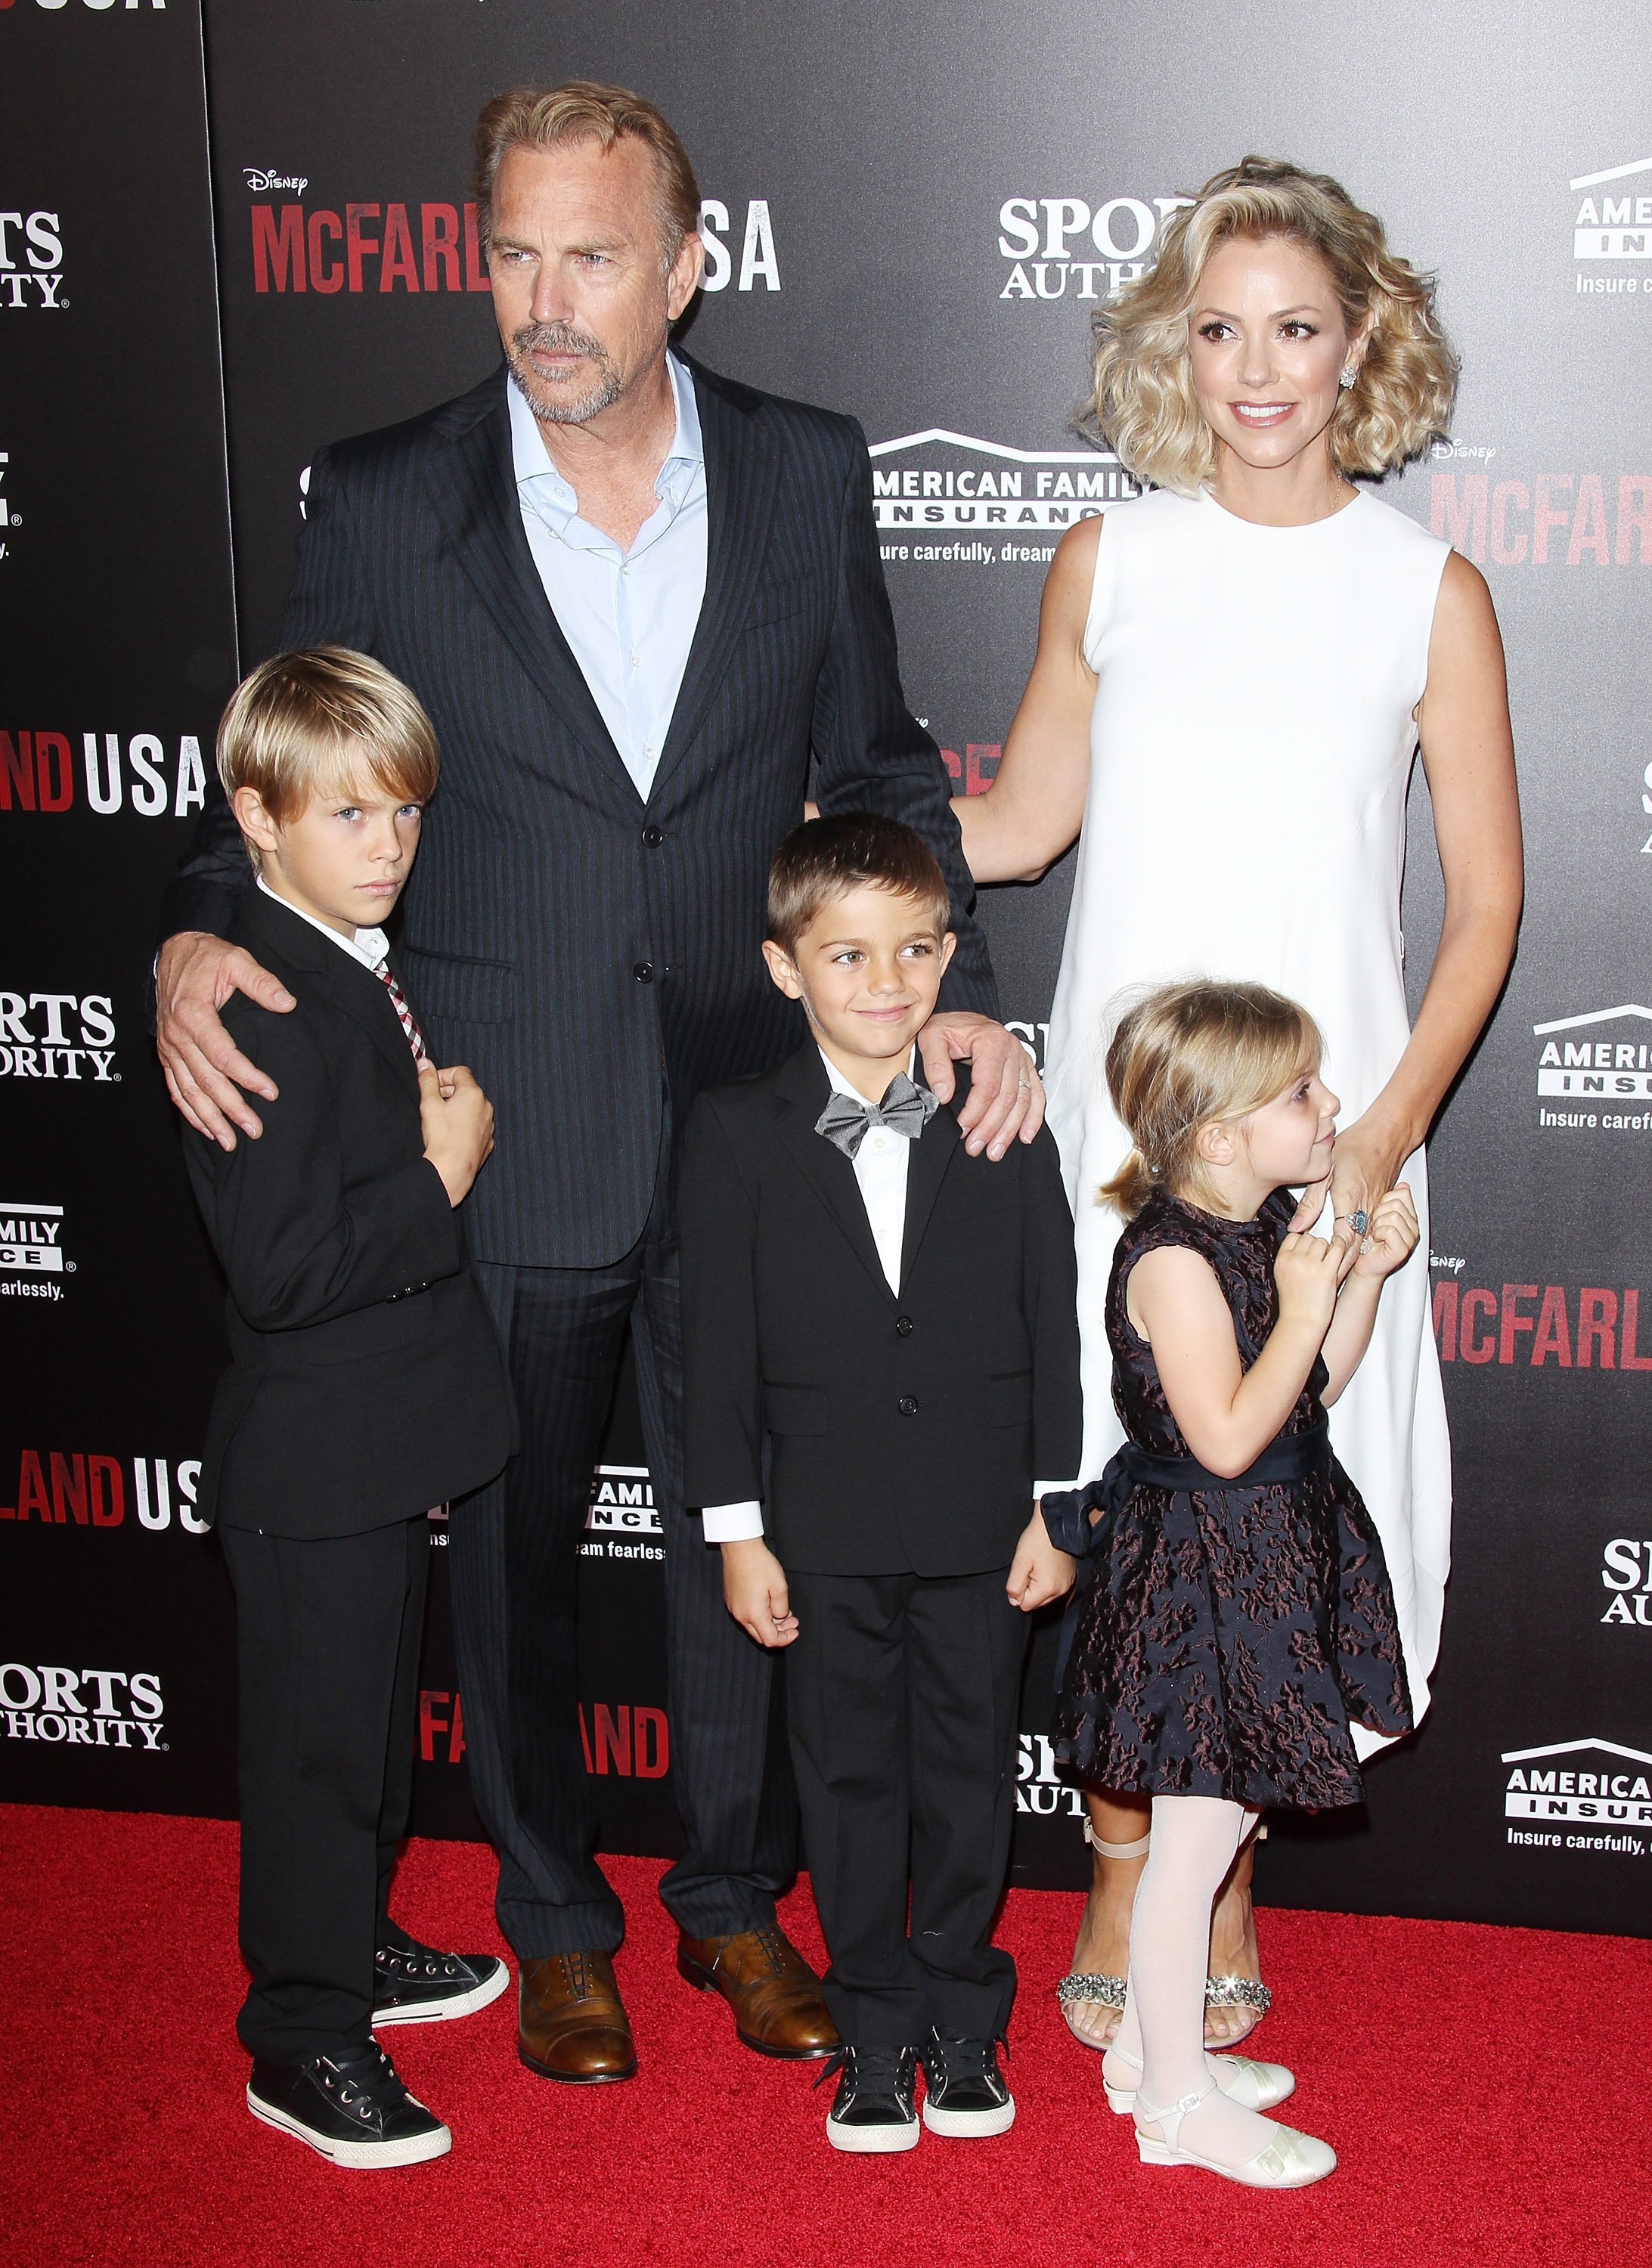 Kevin Costner and his family arrive at the world premiere of "McFarland, USA" held at the El Capitan Theatre on February 9, 2015, in Hollywood, California. | Source: Getty Images